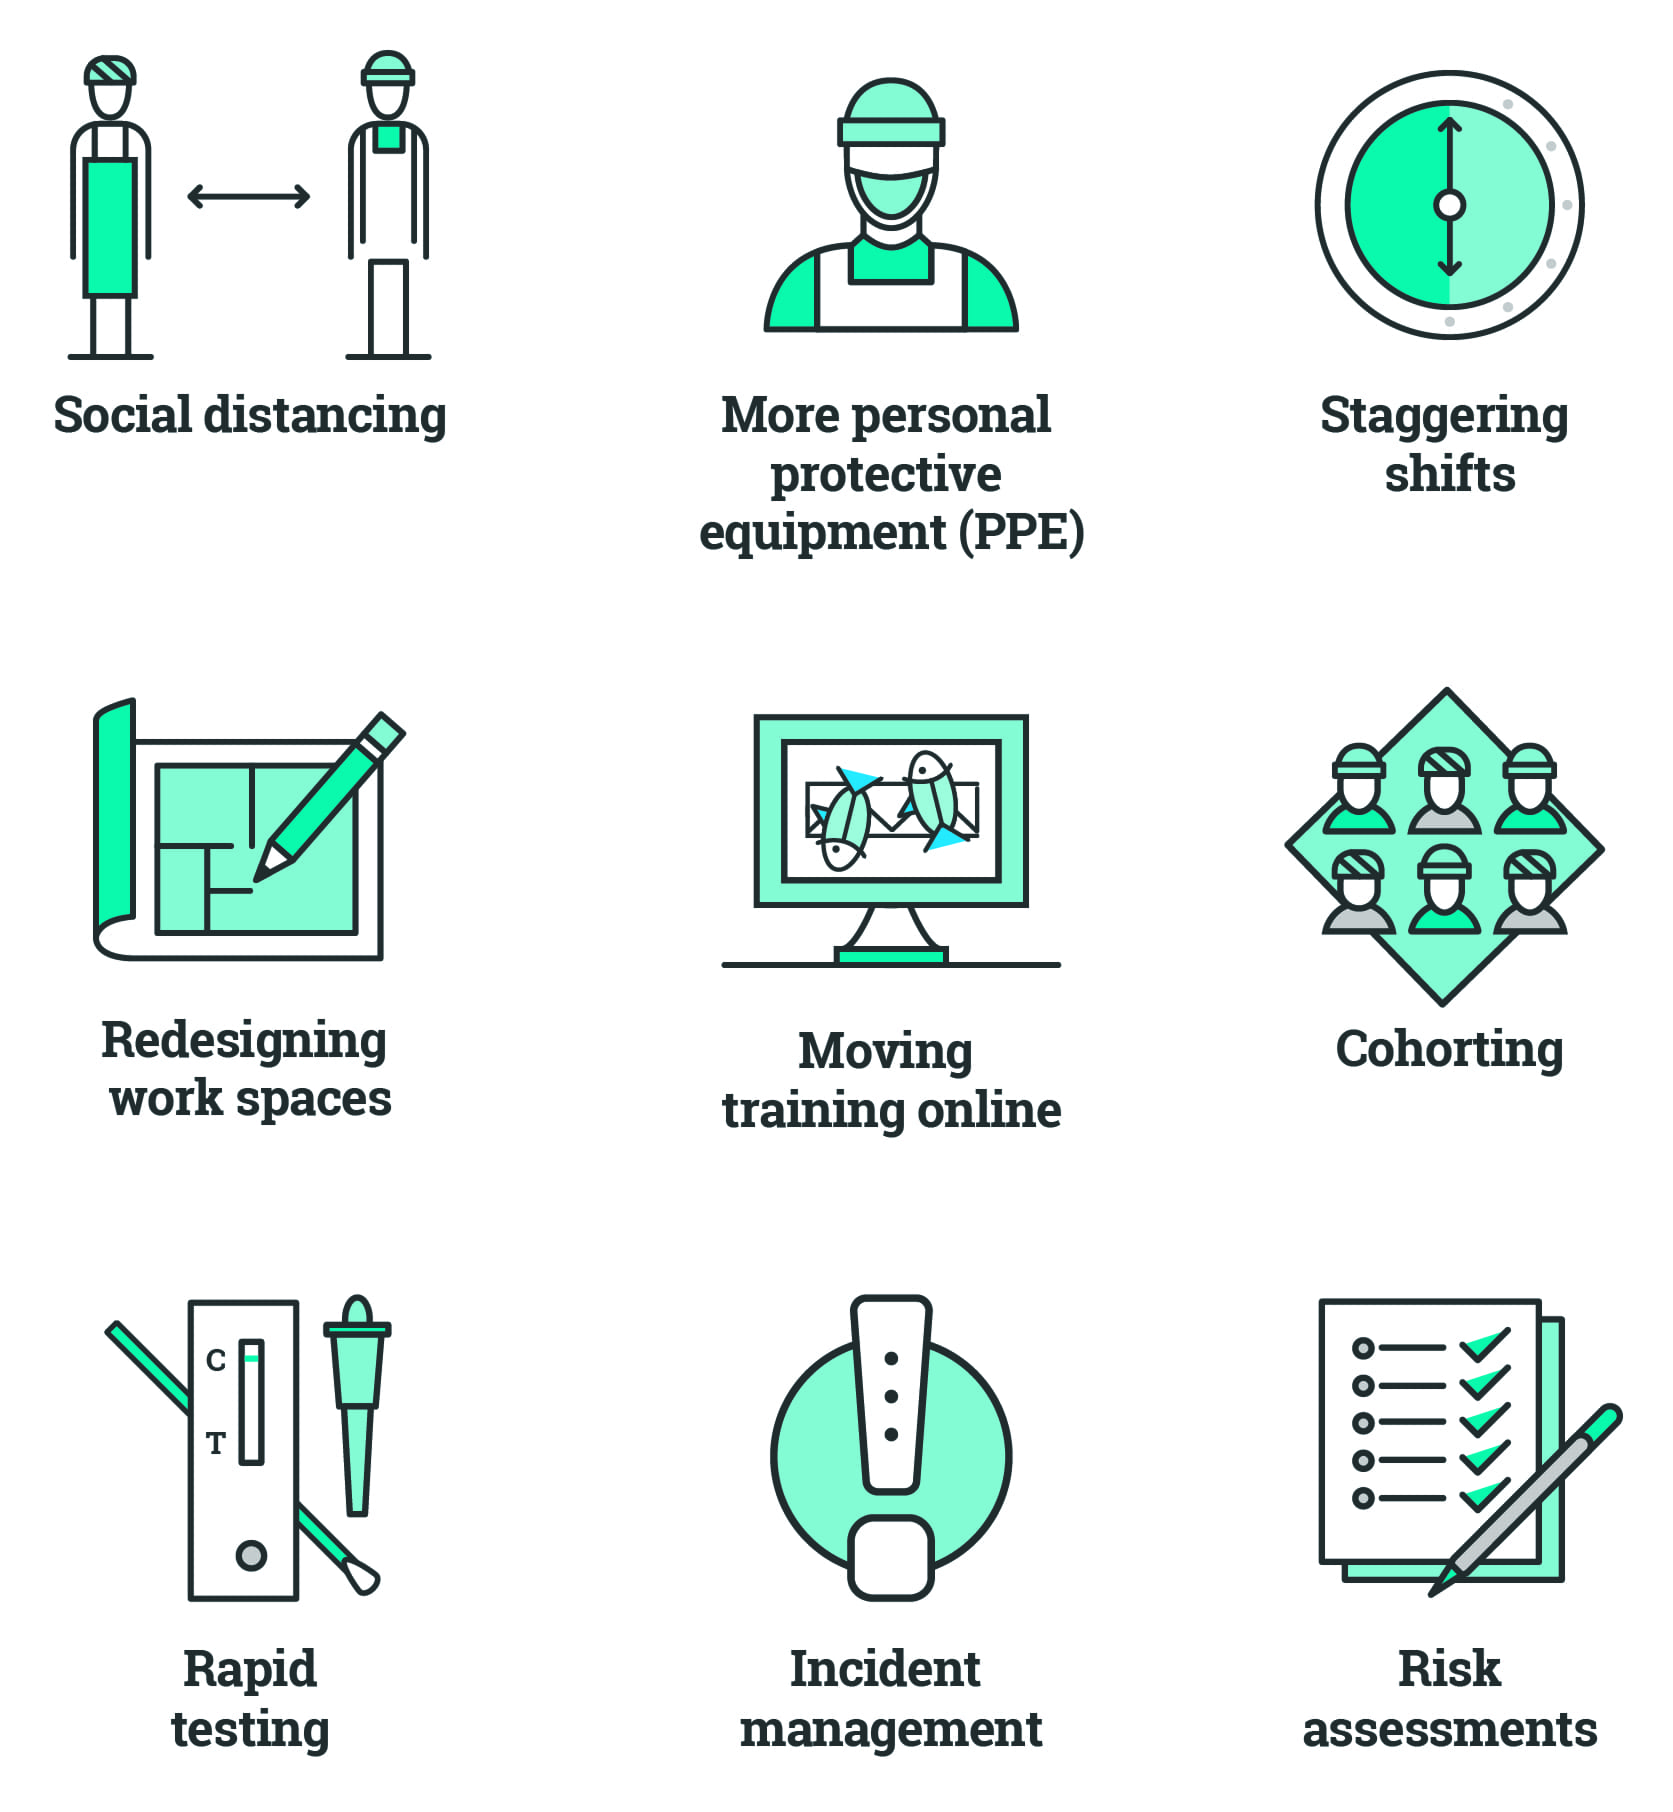 Icons representing: social distancing, more personal protective equipment (PPE), staggering shifts, redesigning work spaces, moving training online, cohorting, rapid testing, incident management, risk assessments